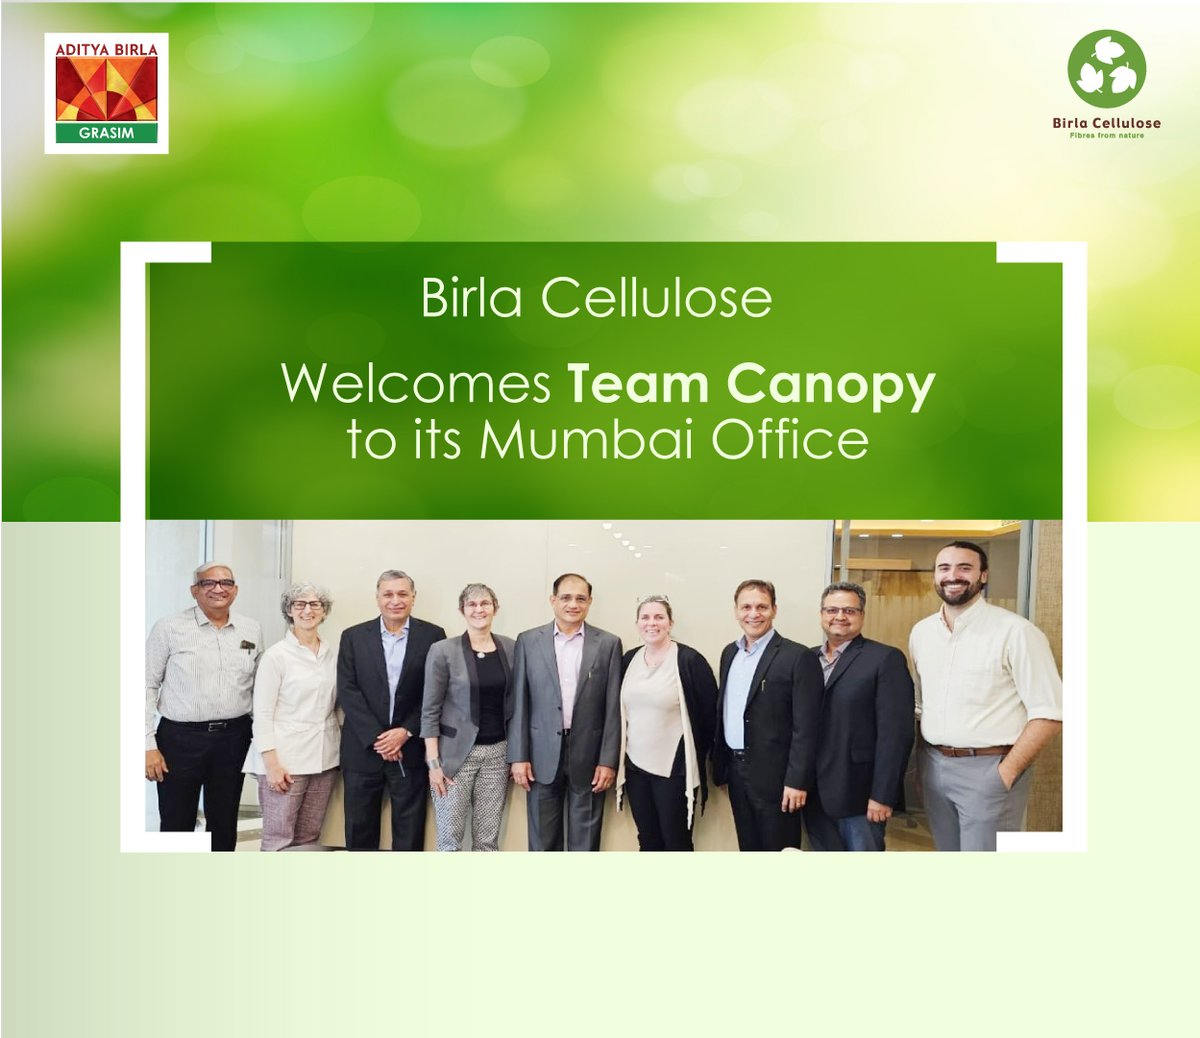 Birla Cellulose welcomed Canopy Team in Mumbai for the discussions on the journey so far on Sustainable Forestry, Strategic Alliance, Partnerships & Way Forward. 
#Sustainability #SustainableSupplyChains #Canopy #circulareconomy, #sustainablefashion #SustainableForestry